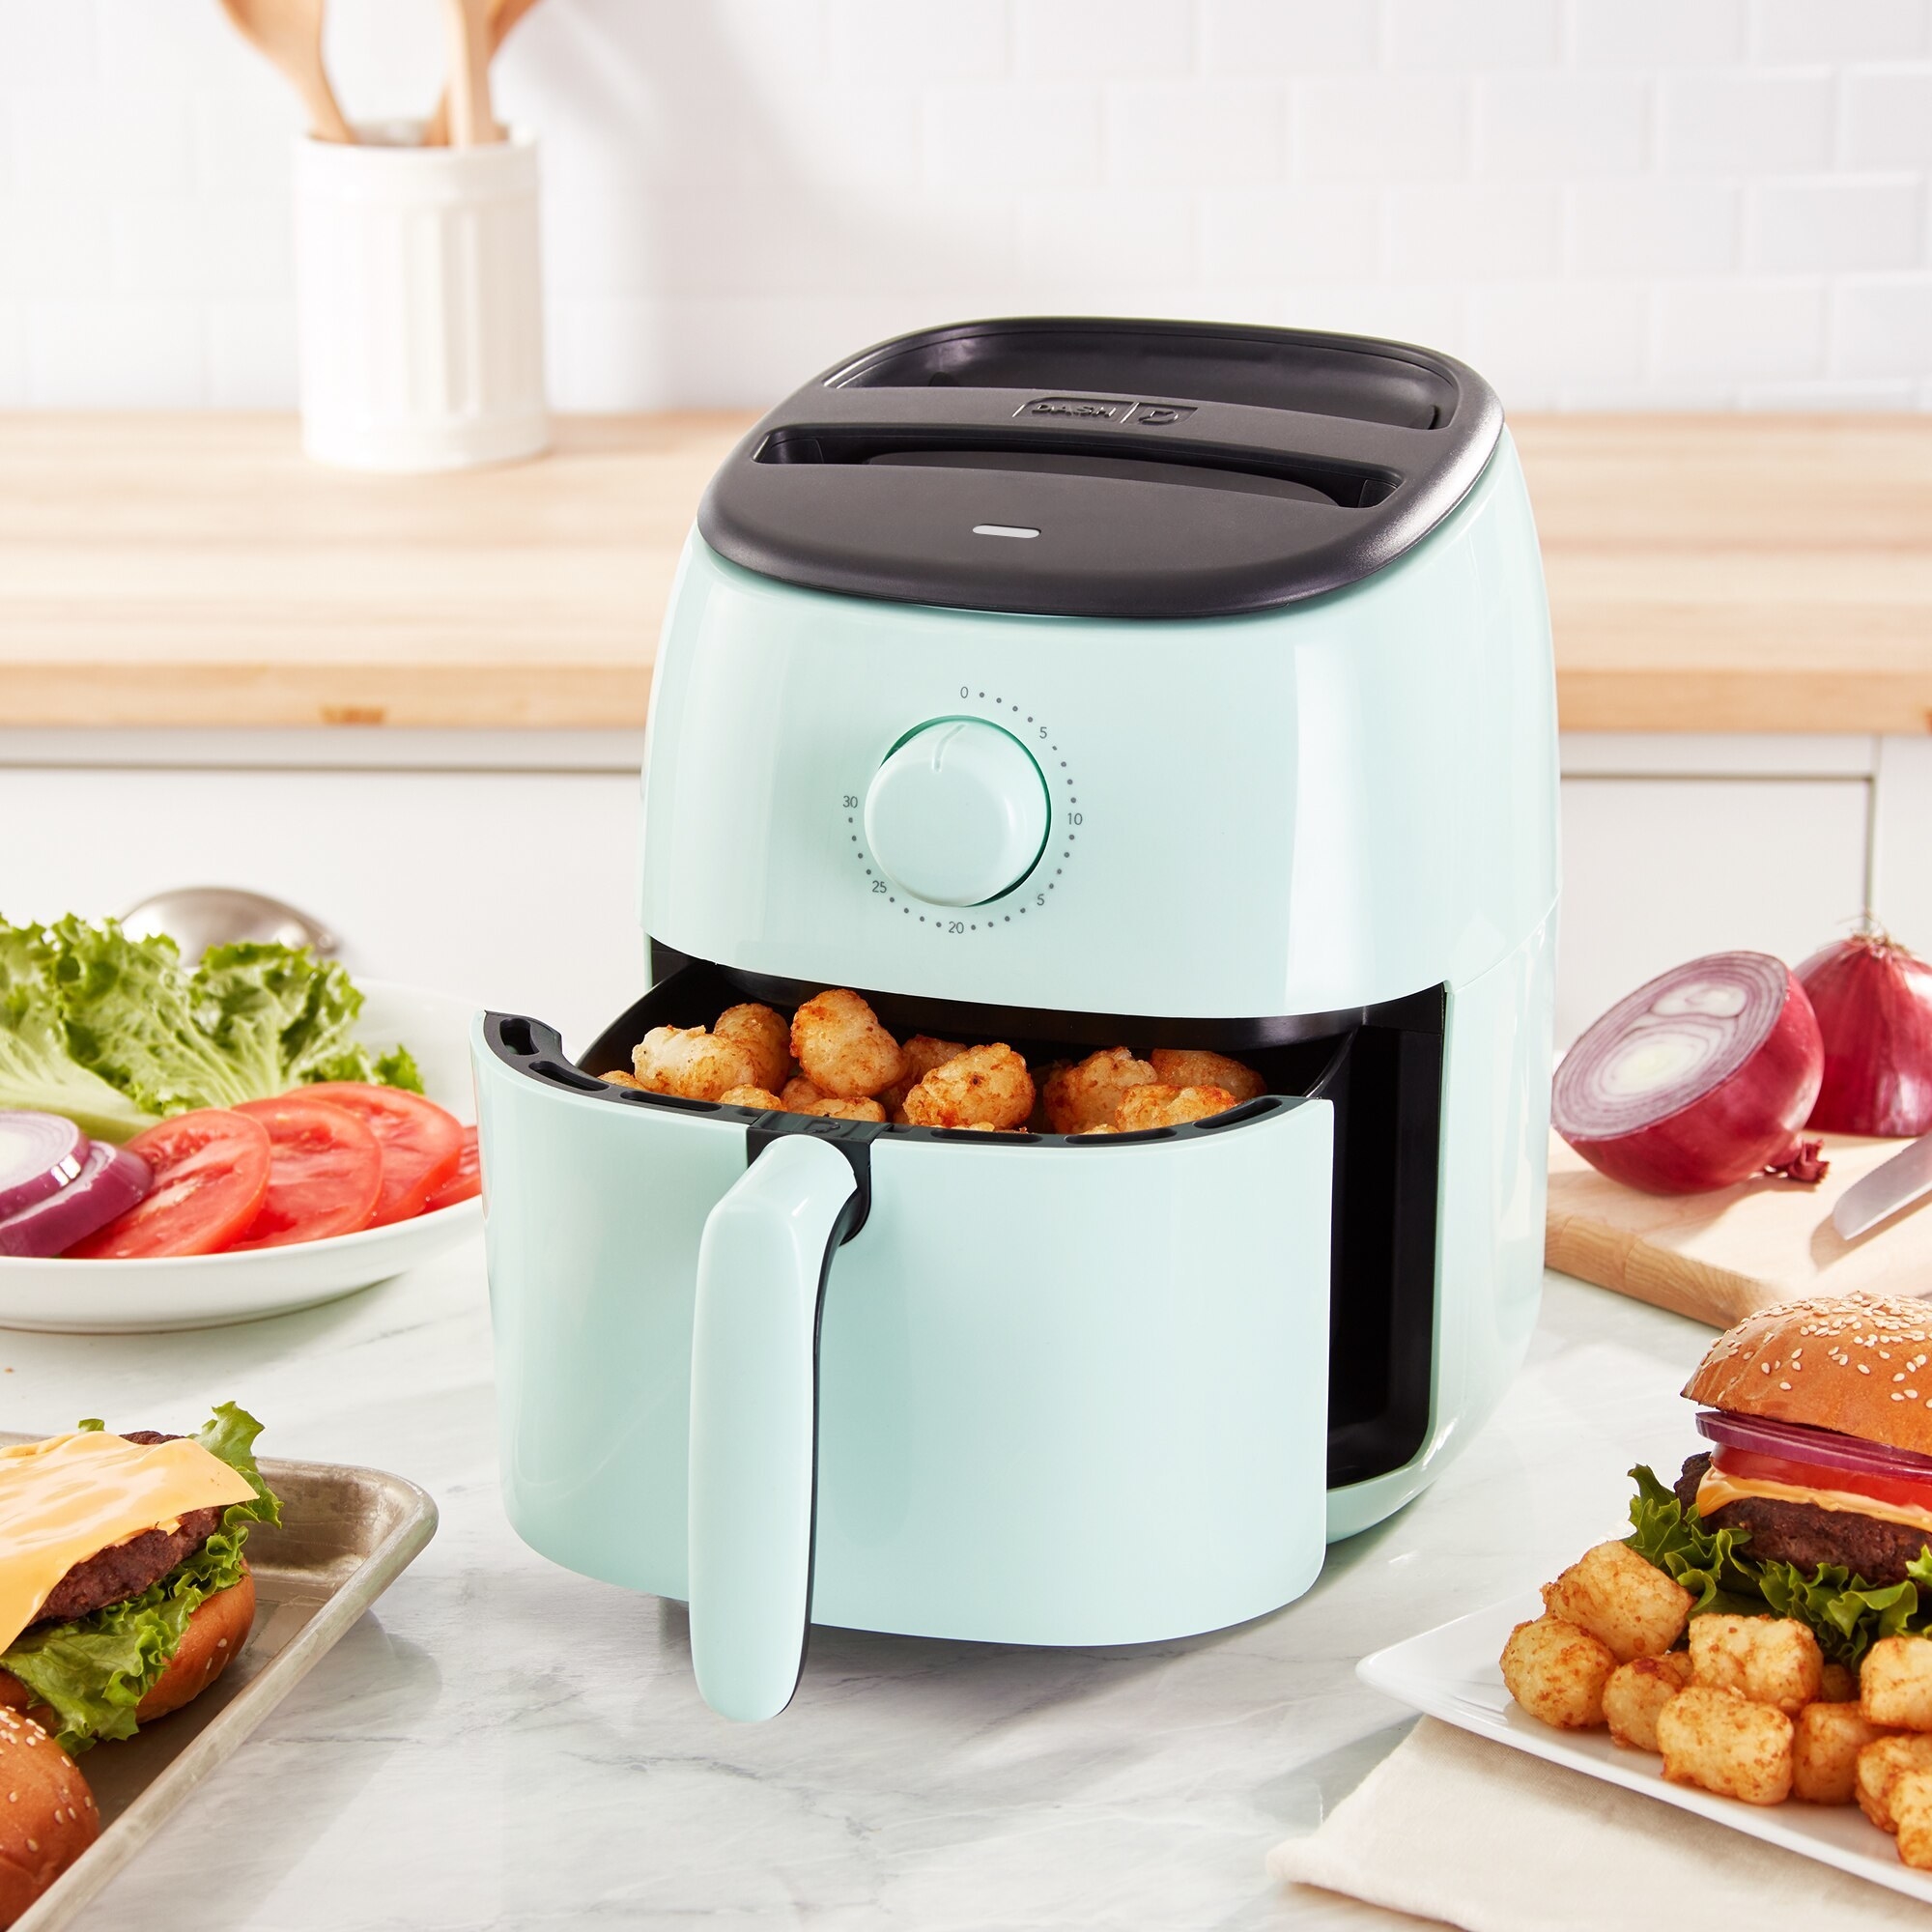 The air fryer filled with freshly-made fried cauliflower